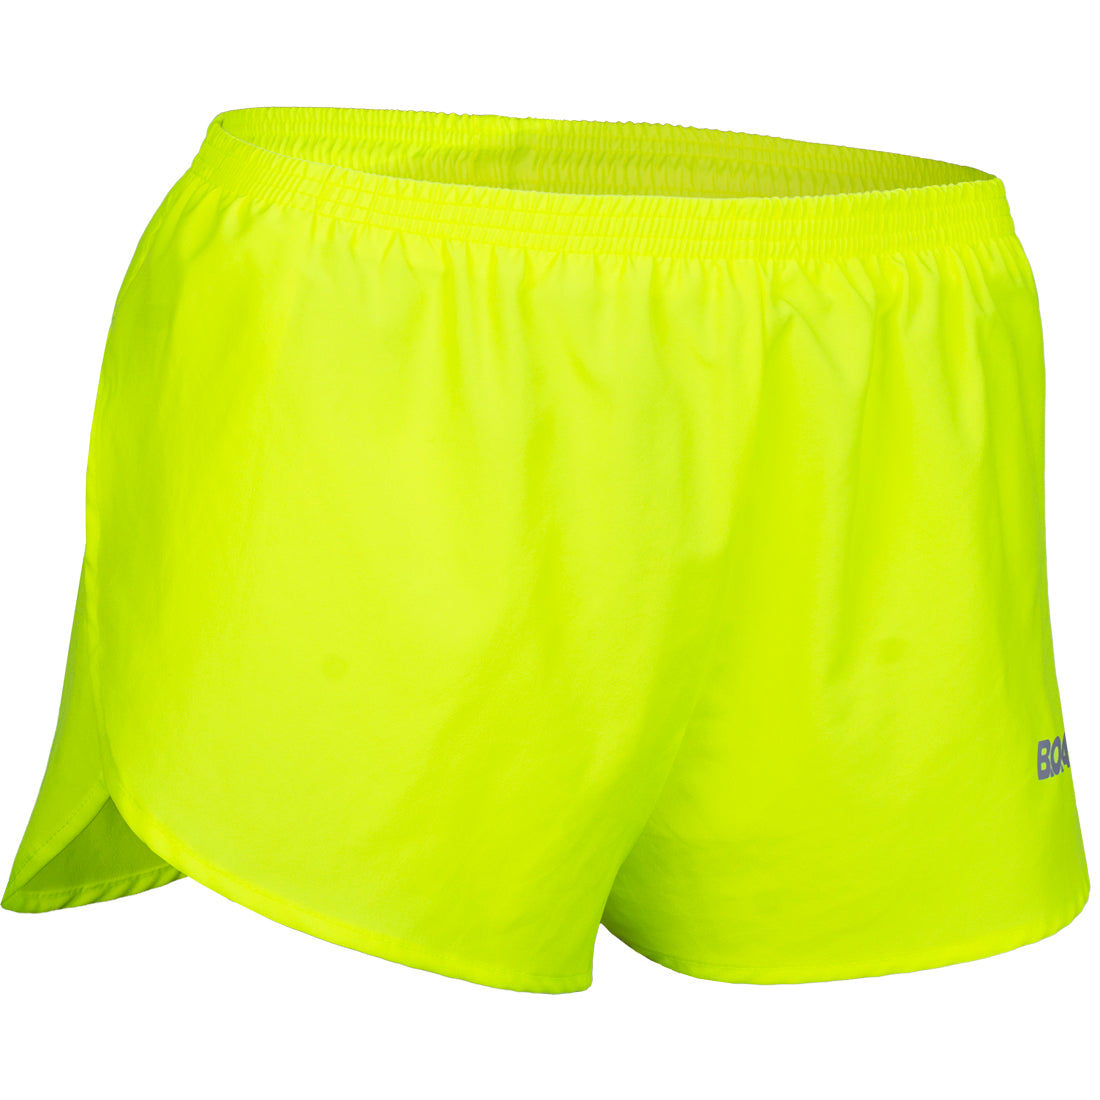 Neon yellow athletic shorts Large⭐️